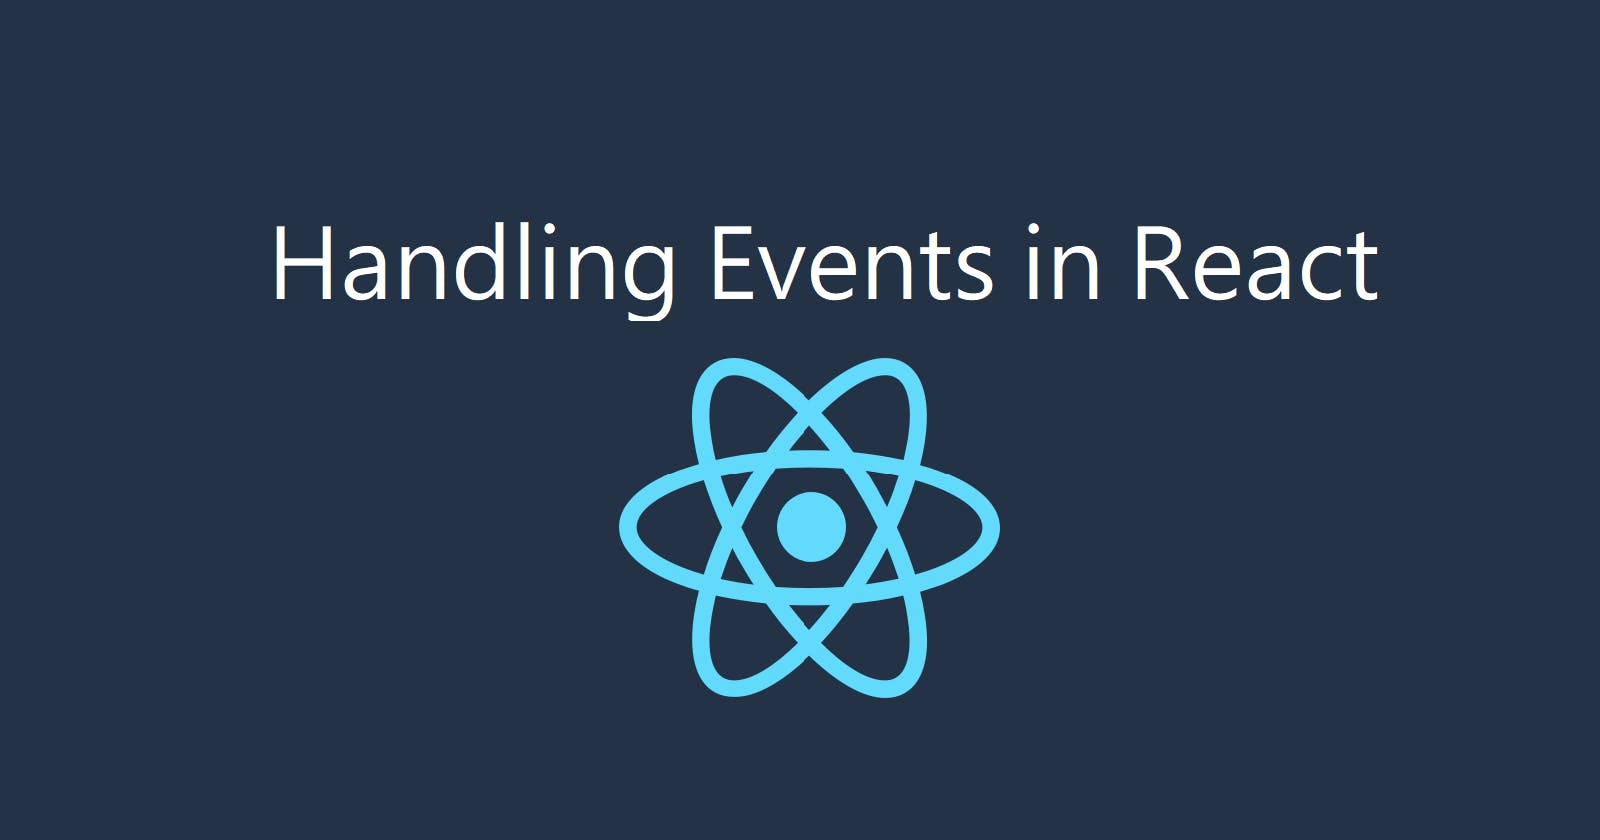 Day 6: Handling Events in React